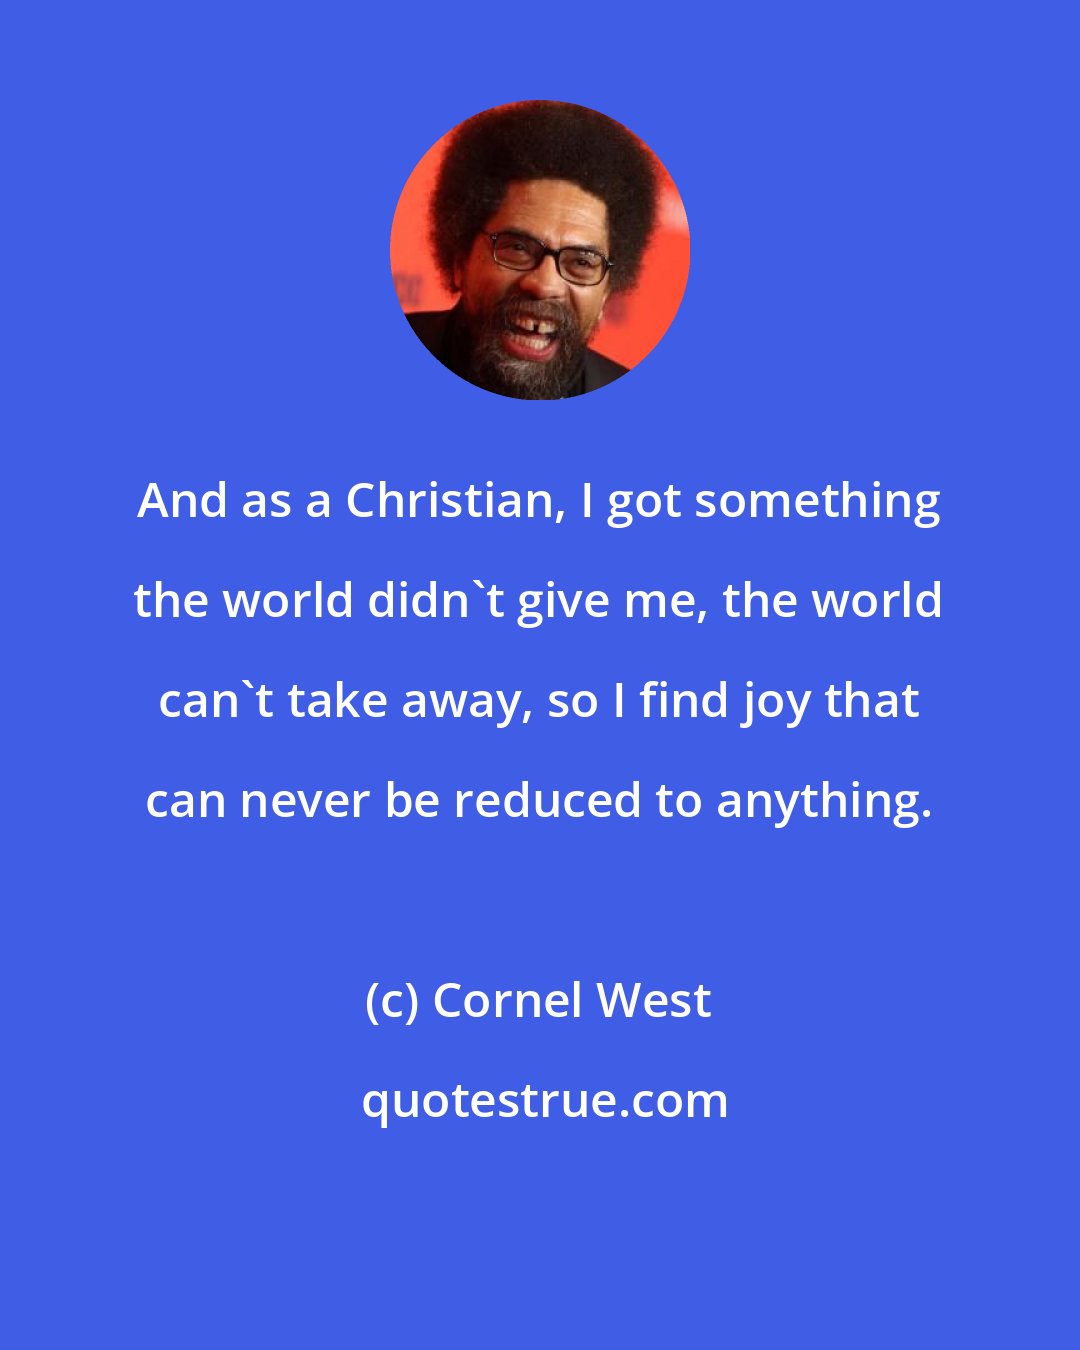 Cornel West: And as a Christian, I got something the world didn't give me, the world can't take away, so I find joy that can never be reduced to anything.